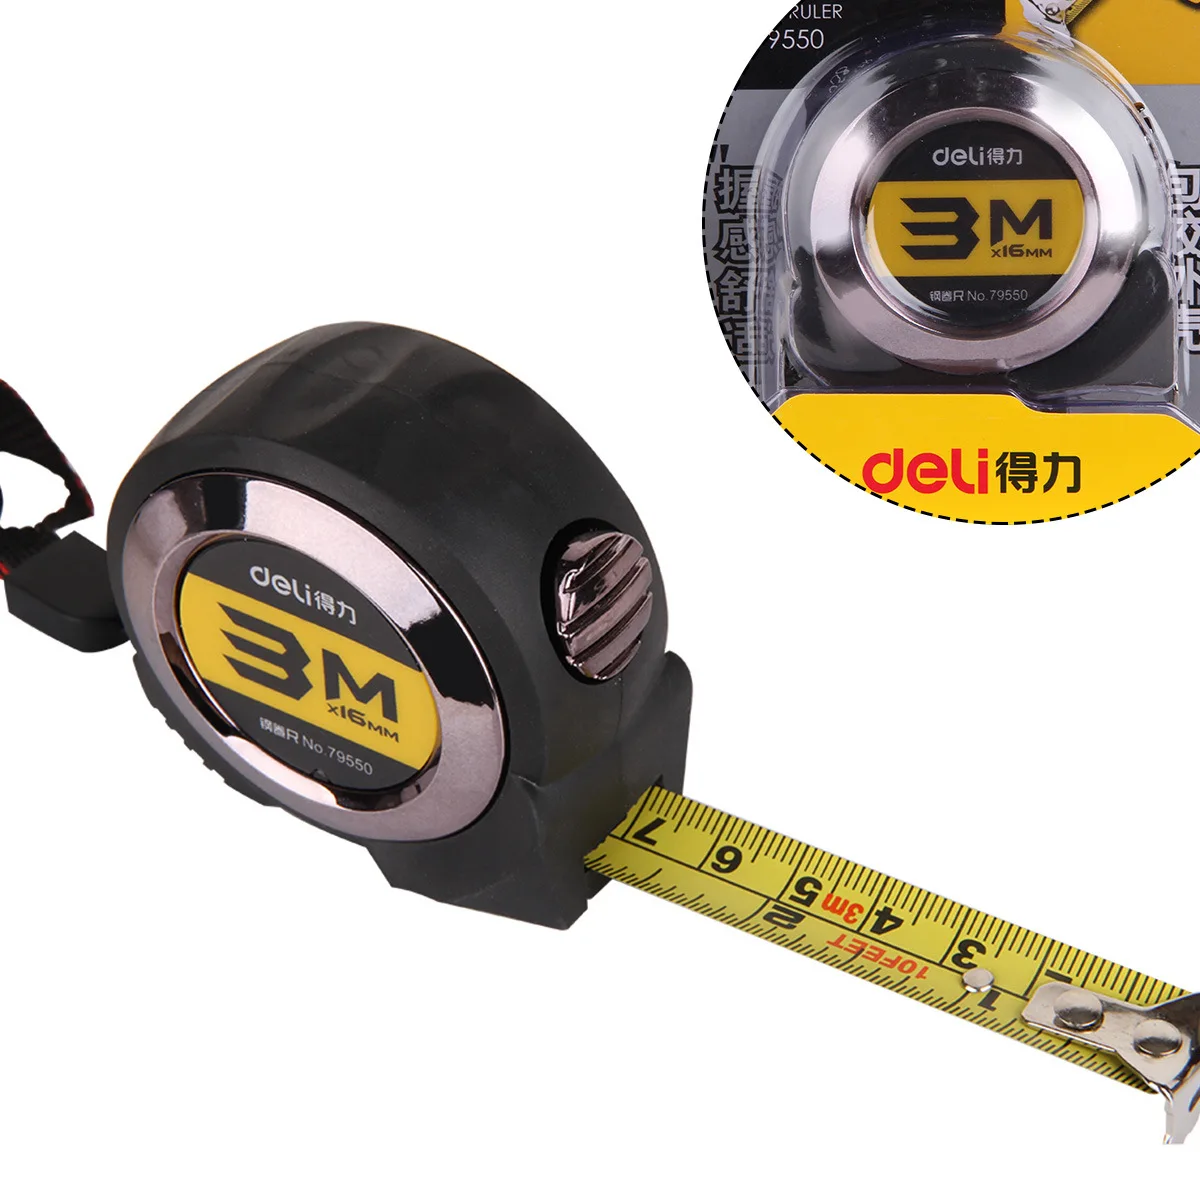 

3M and 5m Deli advanced retractable stainless steel tape, retractable antiskid precision self-locking tape measuring tool